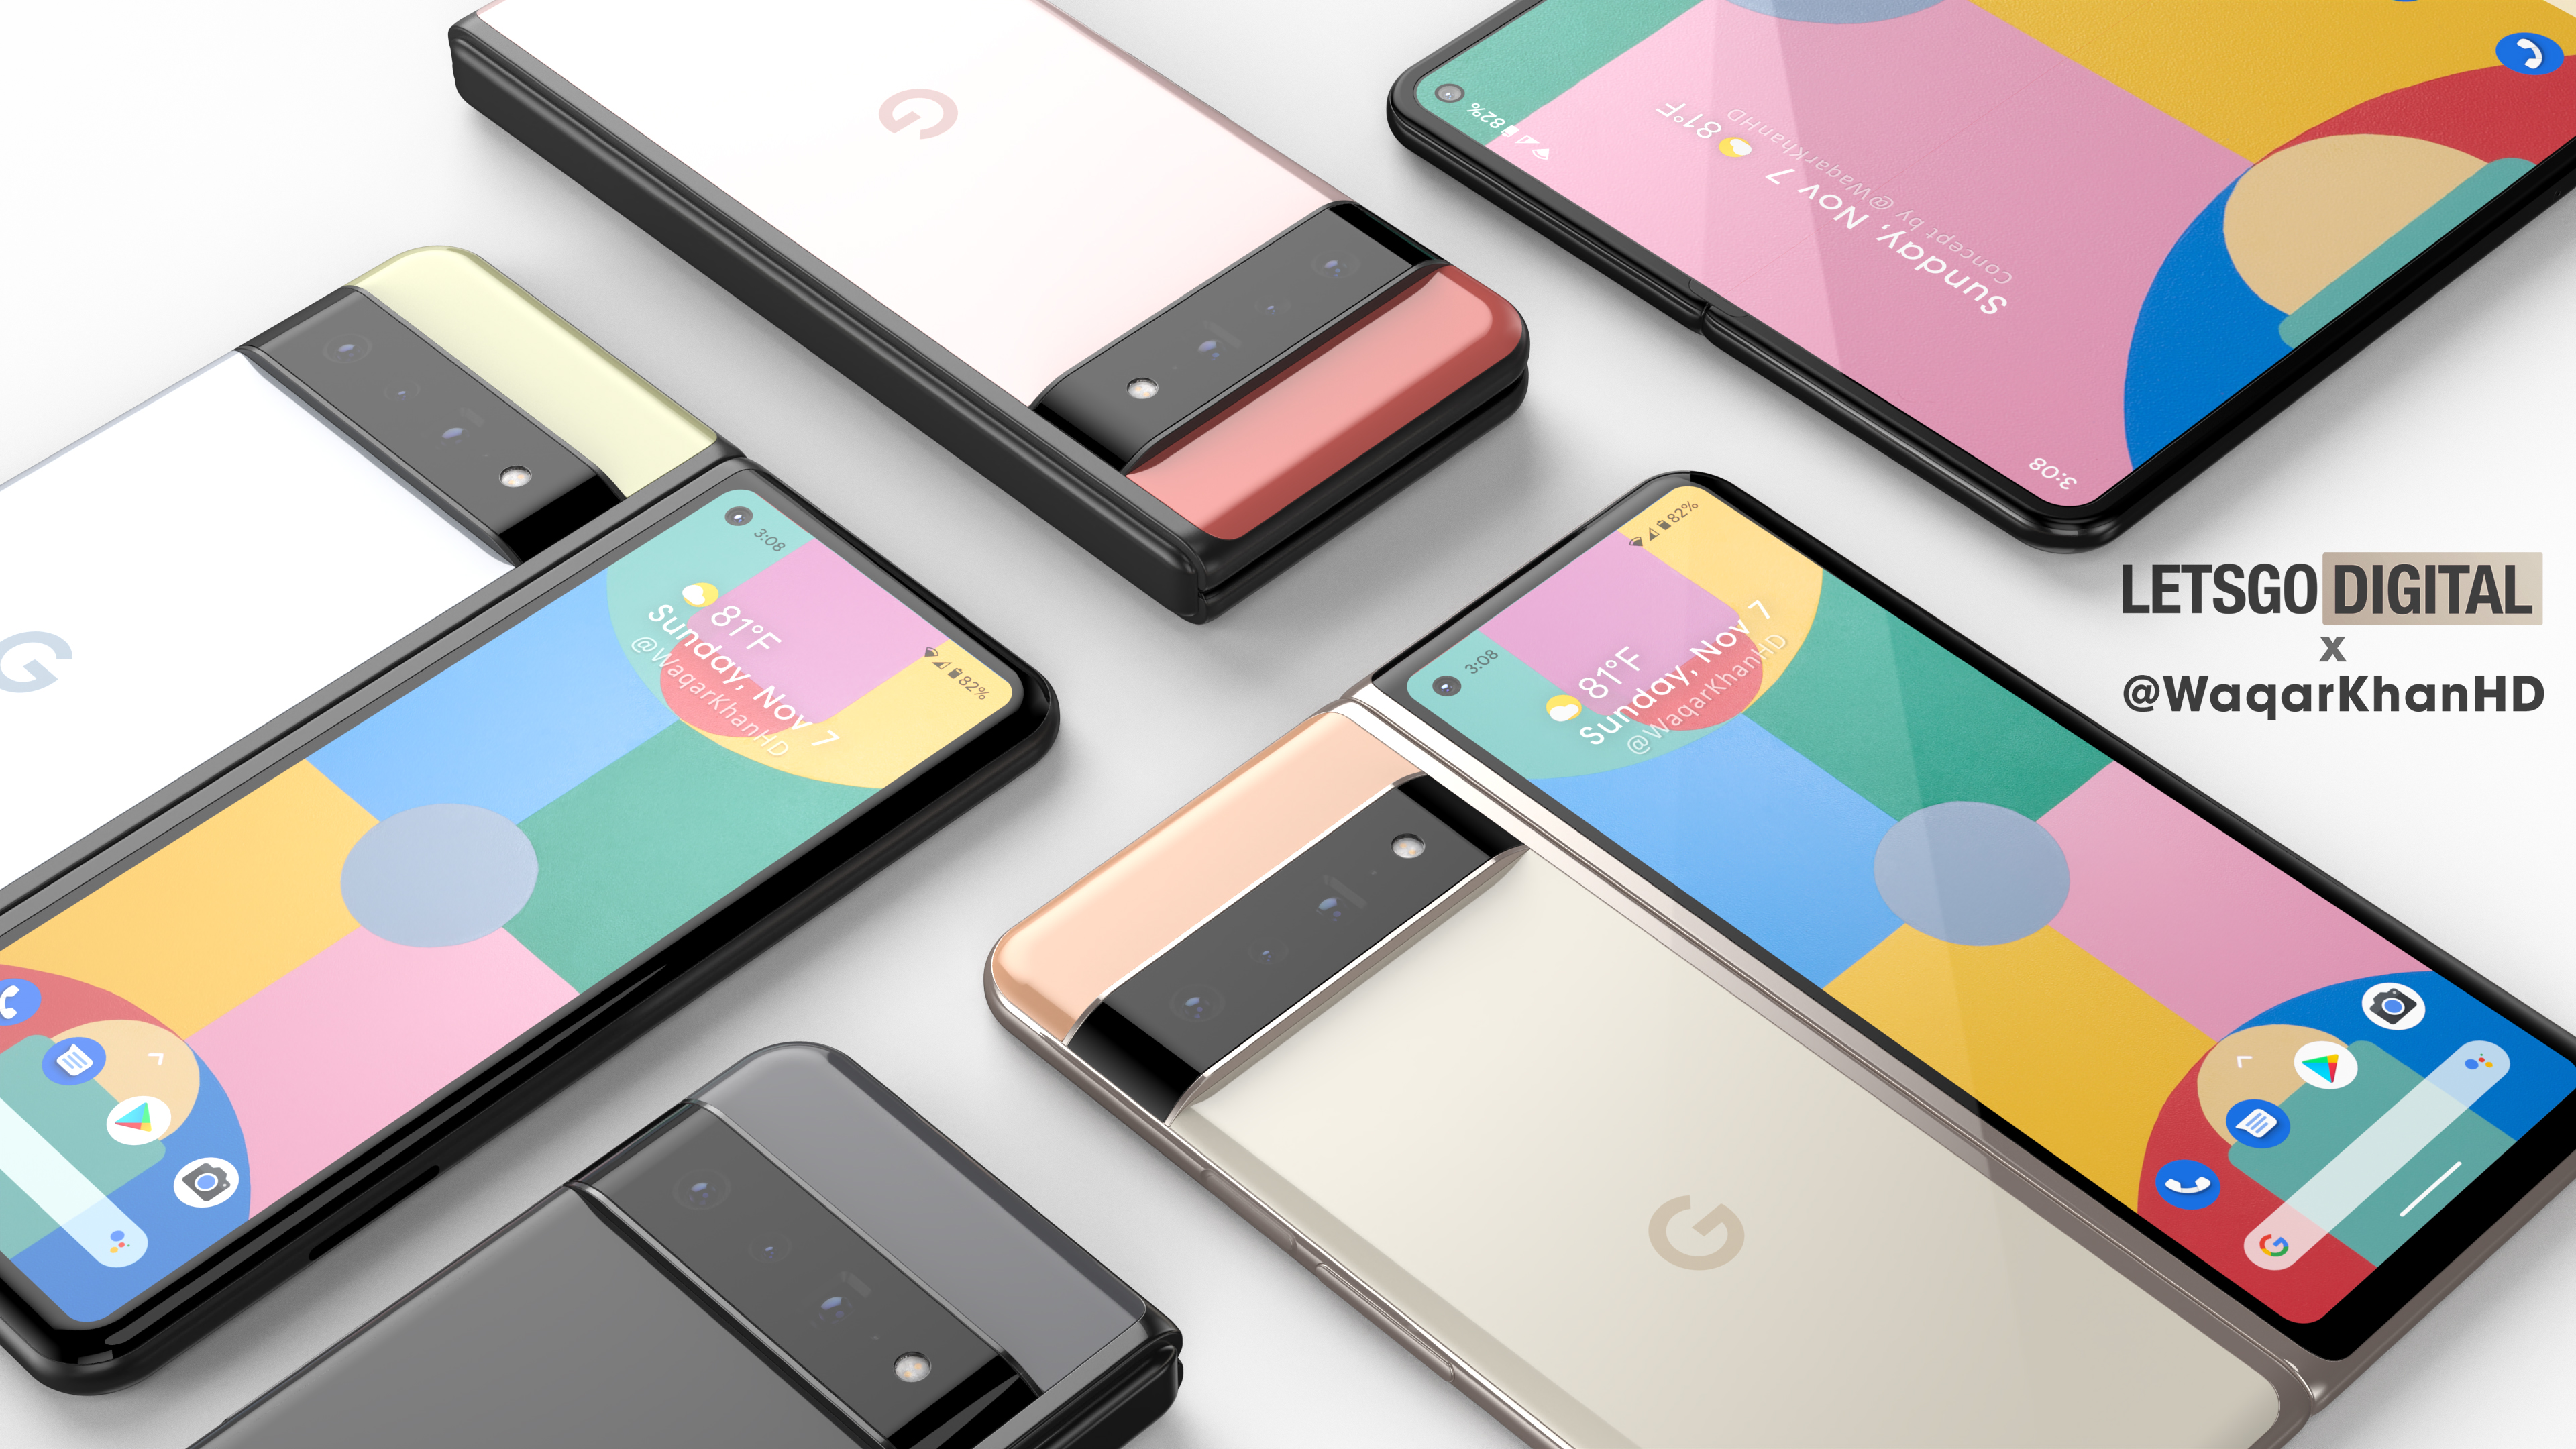 Not a competitor to the Samsung Galaxy Z Fold: Google has cancelled the release of the Pixel Fold smartphone